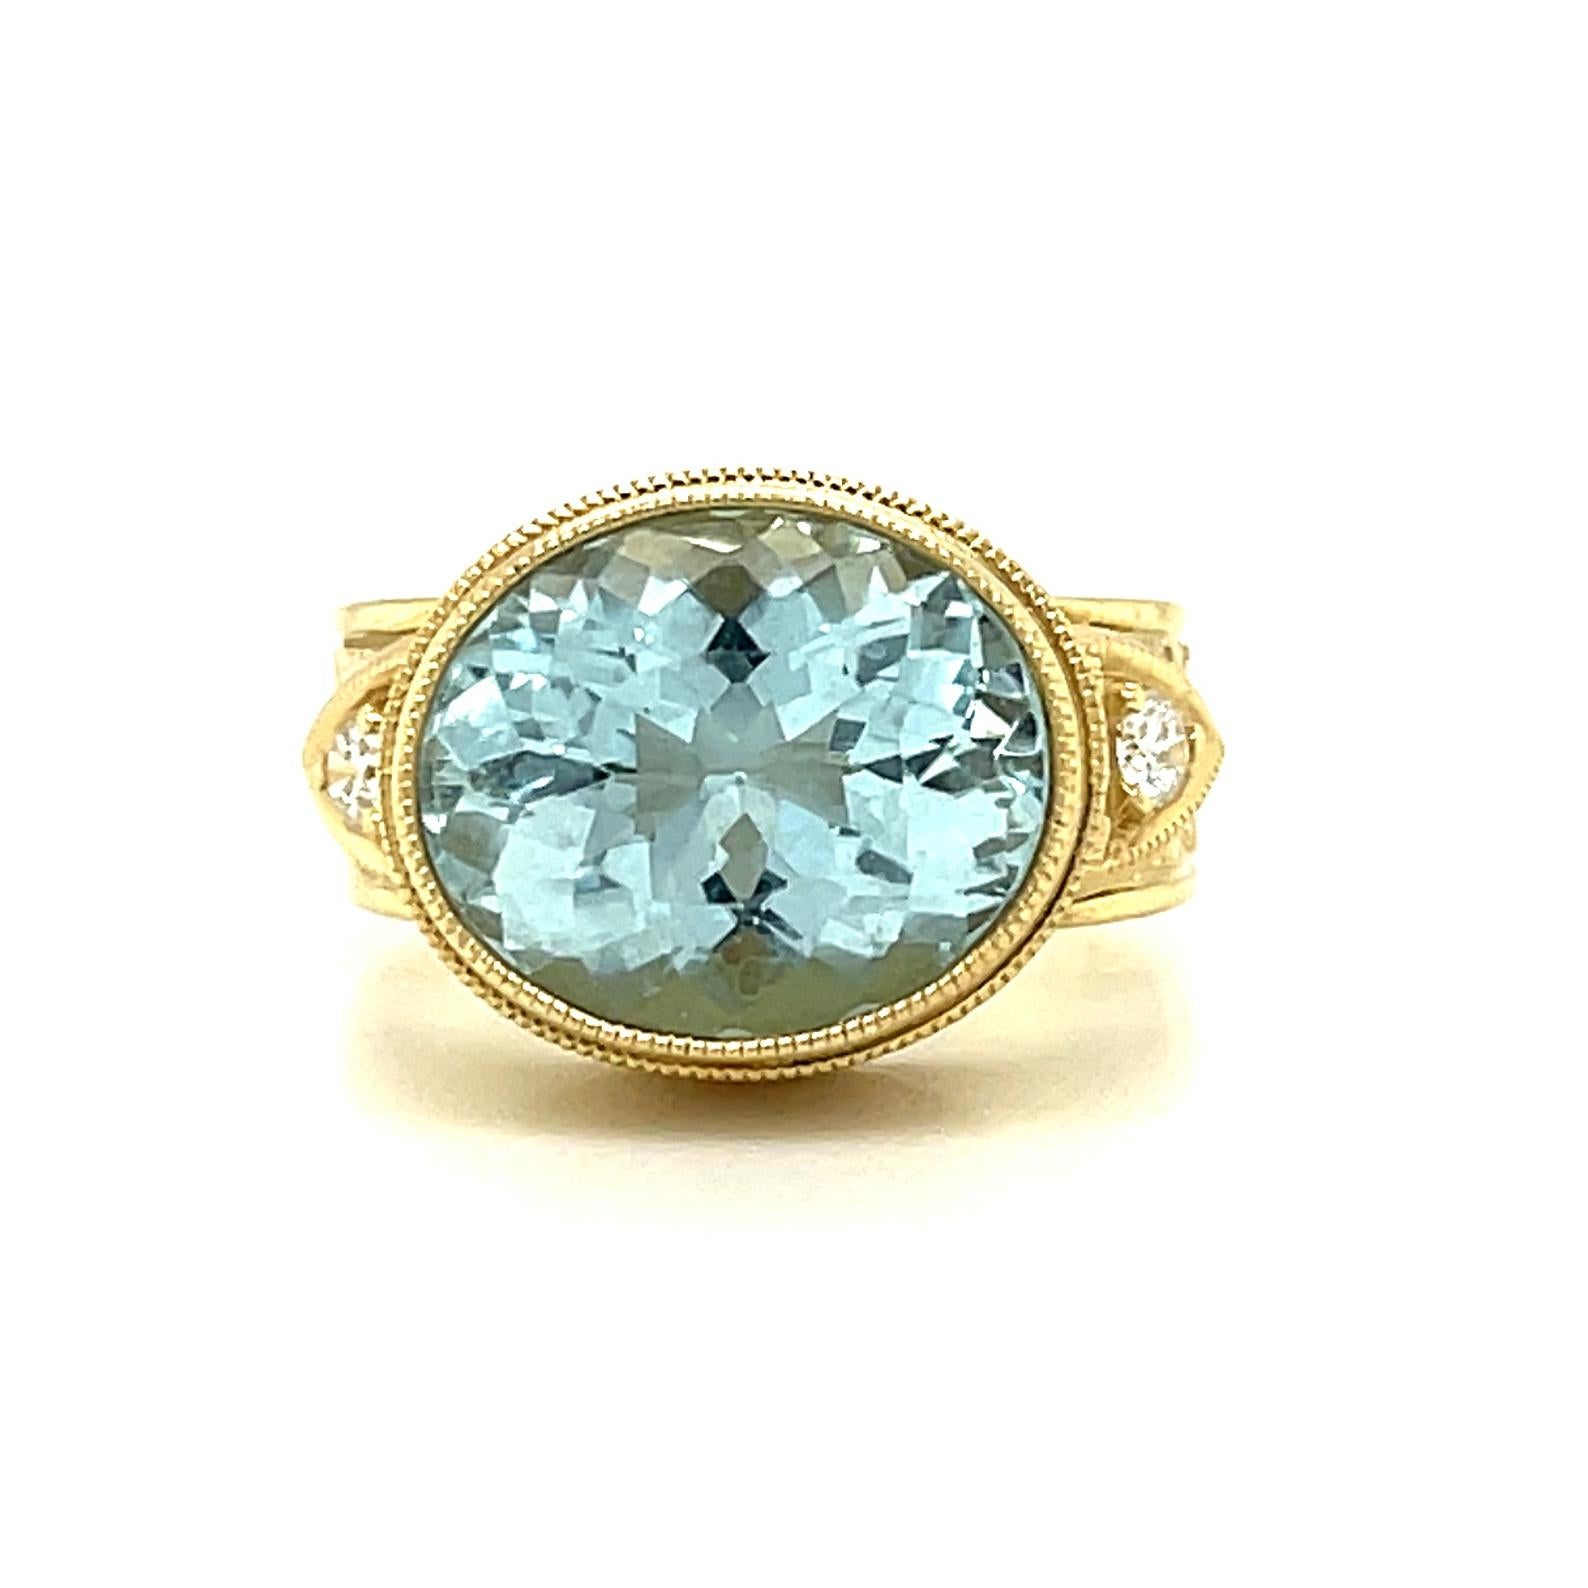 This gorgeous, handmade 18k yellow gold ring features a sparkling aquamarine with beautiful, bright color! The aquamarine is an oval shape, weighs 5.17 carats, and has been oriented to sit 